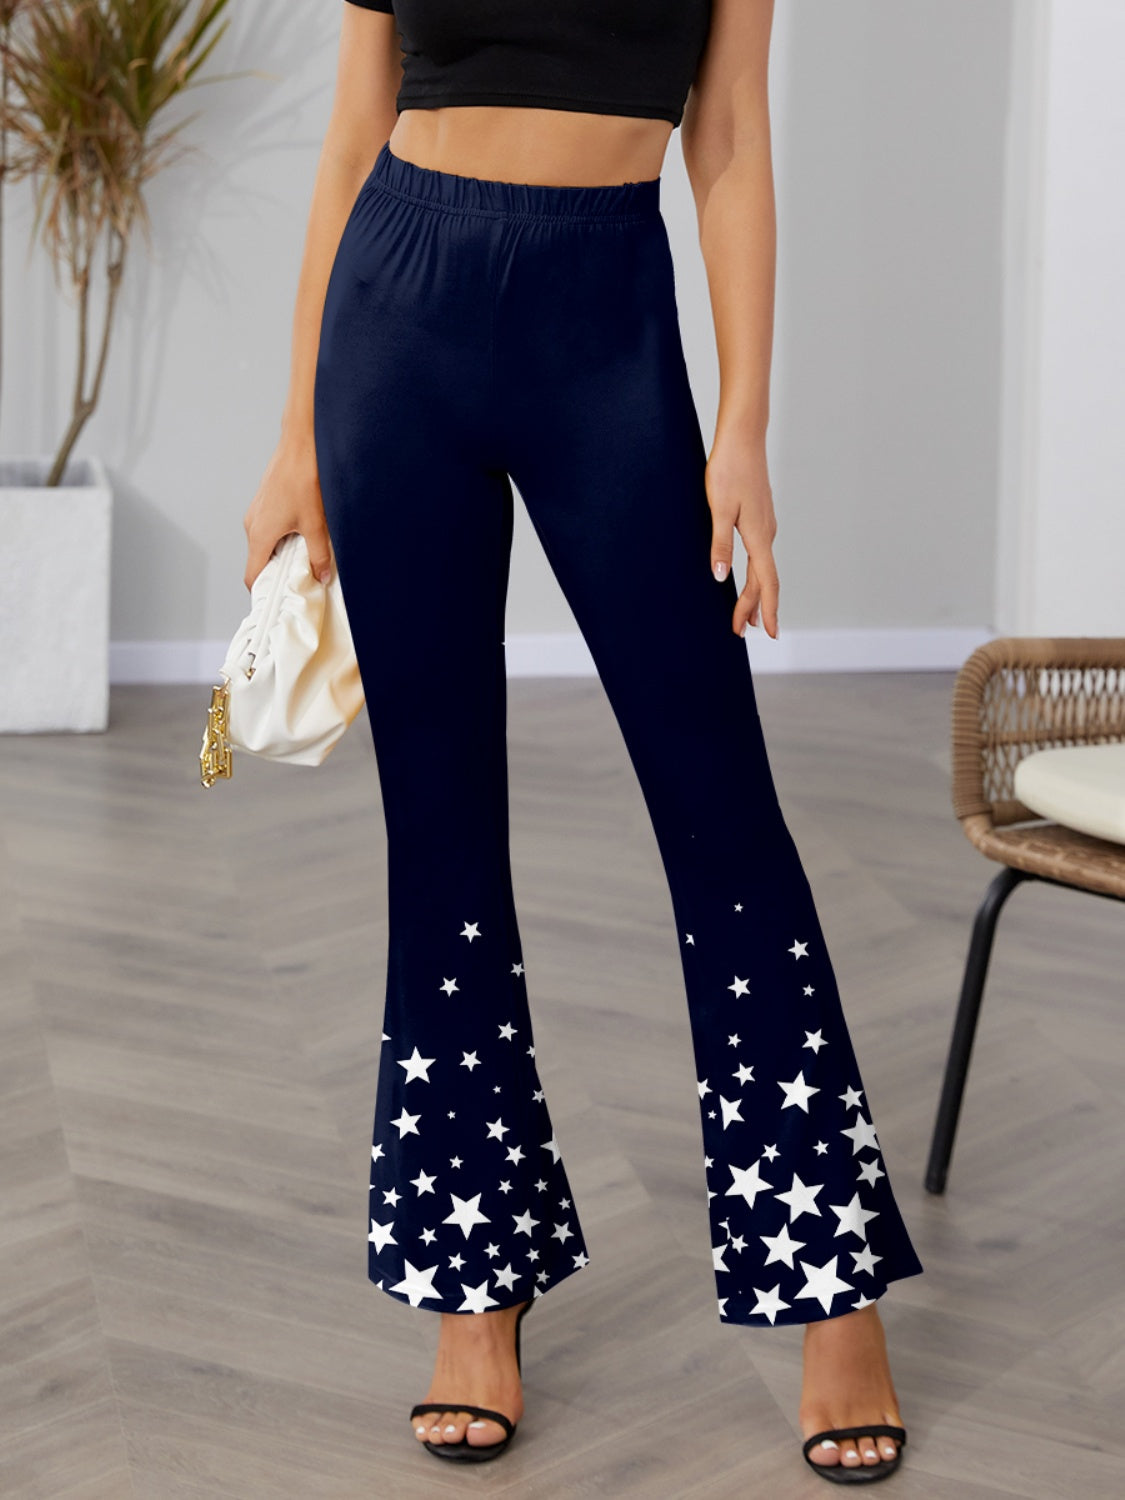 Star Elastic Waist Bootcut Pants free shipping -Oh Em Gee Boutique